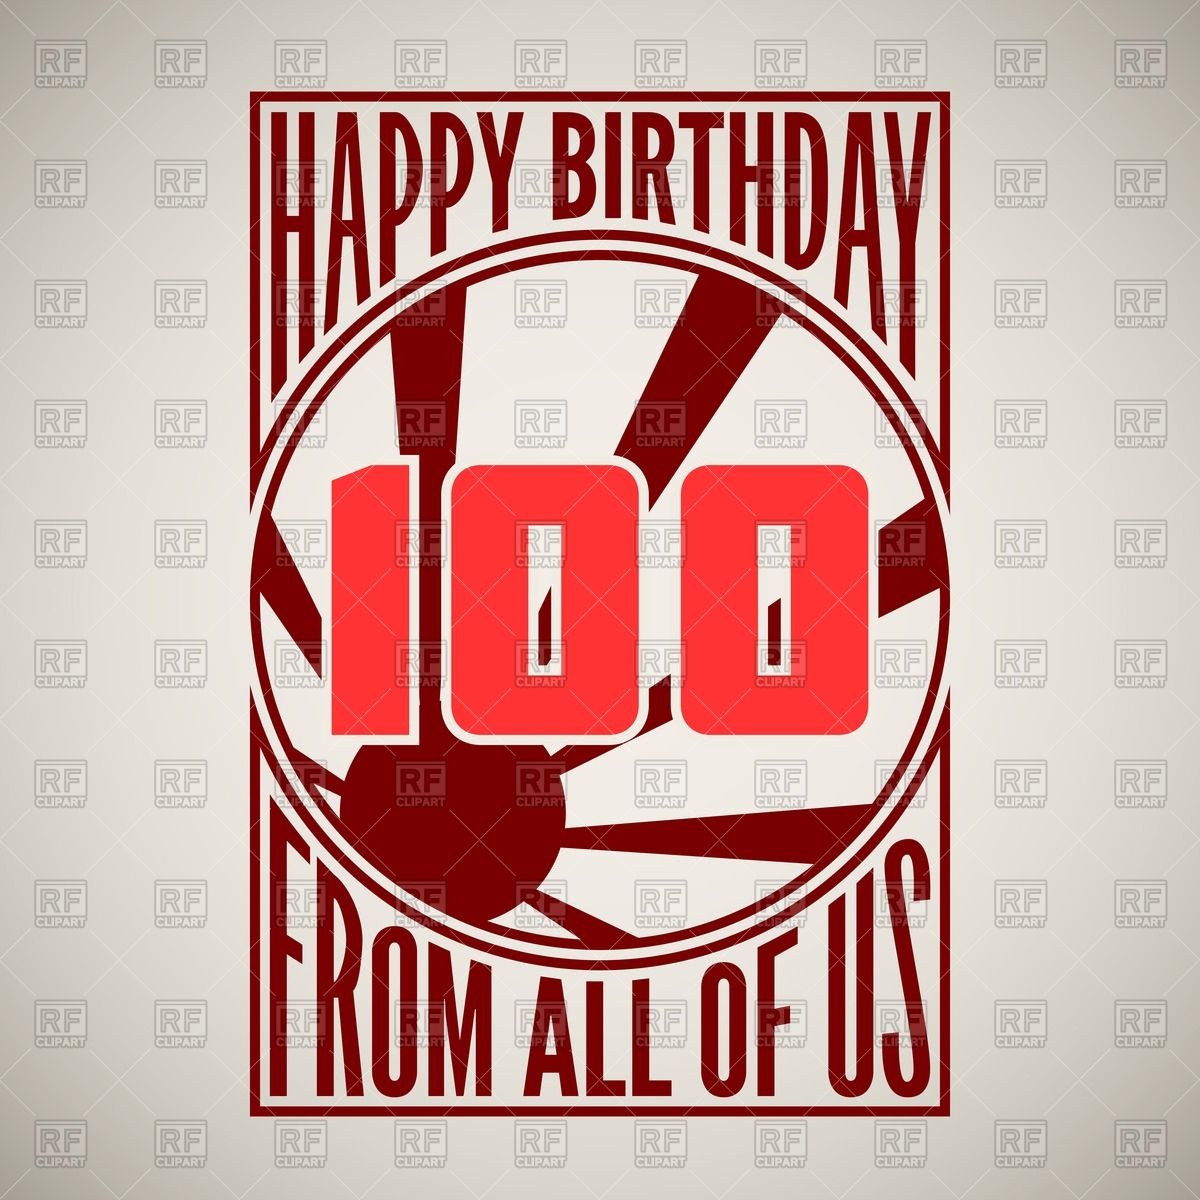 Retro Style Birthday Poster   100 Years Anniversary Download Royalty    